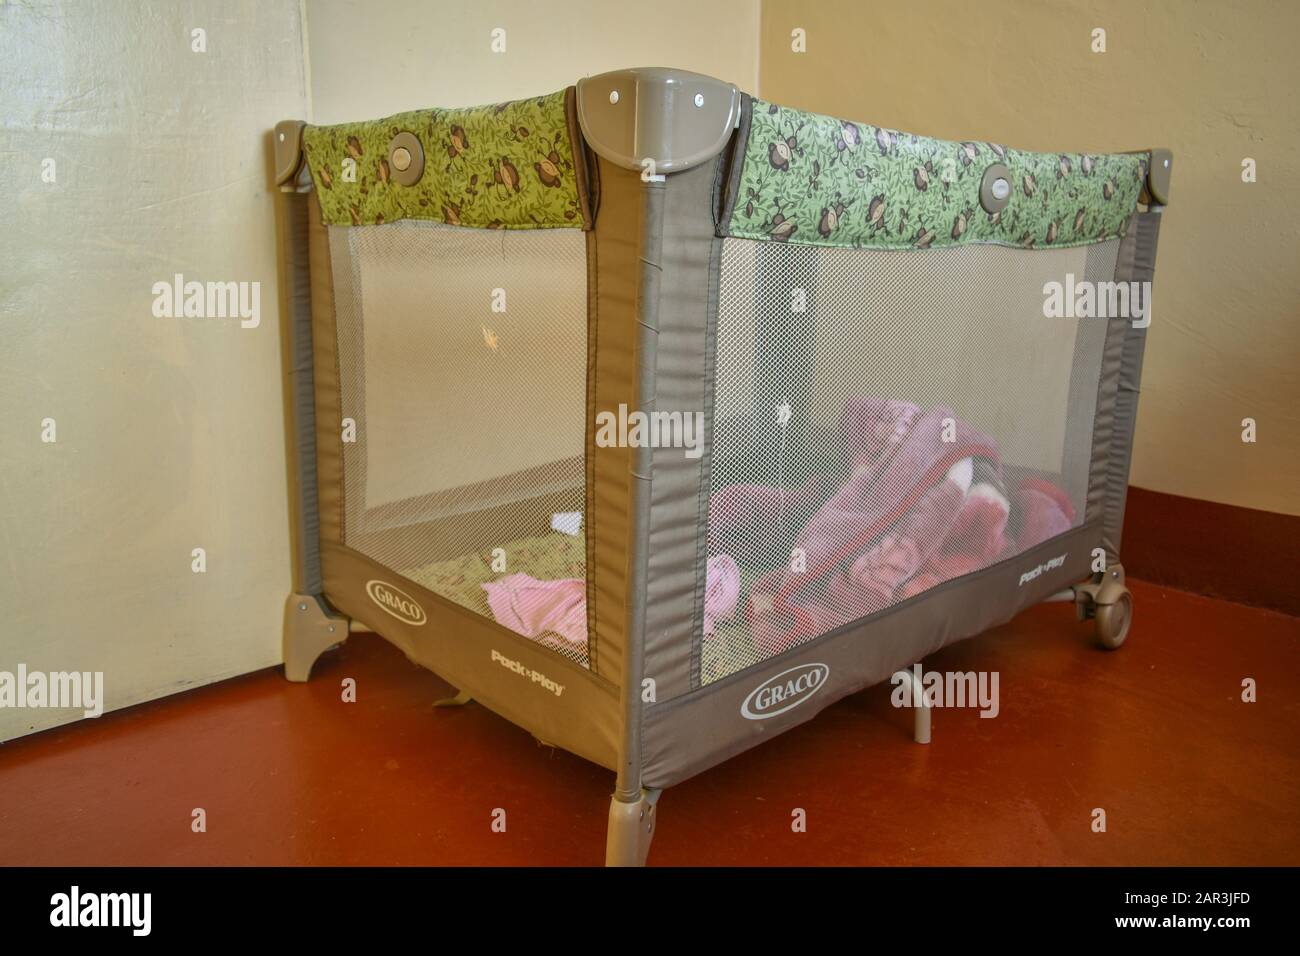 Nairobi/Kenya- January 25th 2020: a baby playyard crib of the brand graco which is good for travelling. it serves as both playing and sleeping yard. Stock Photo